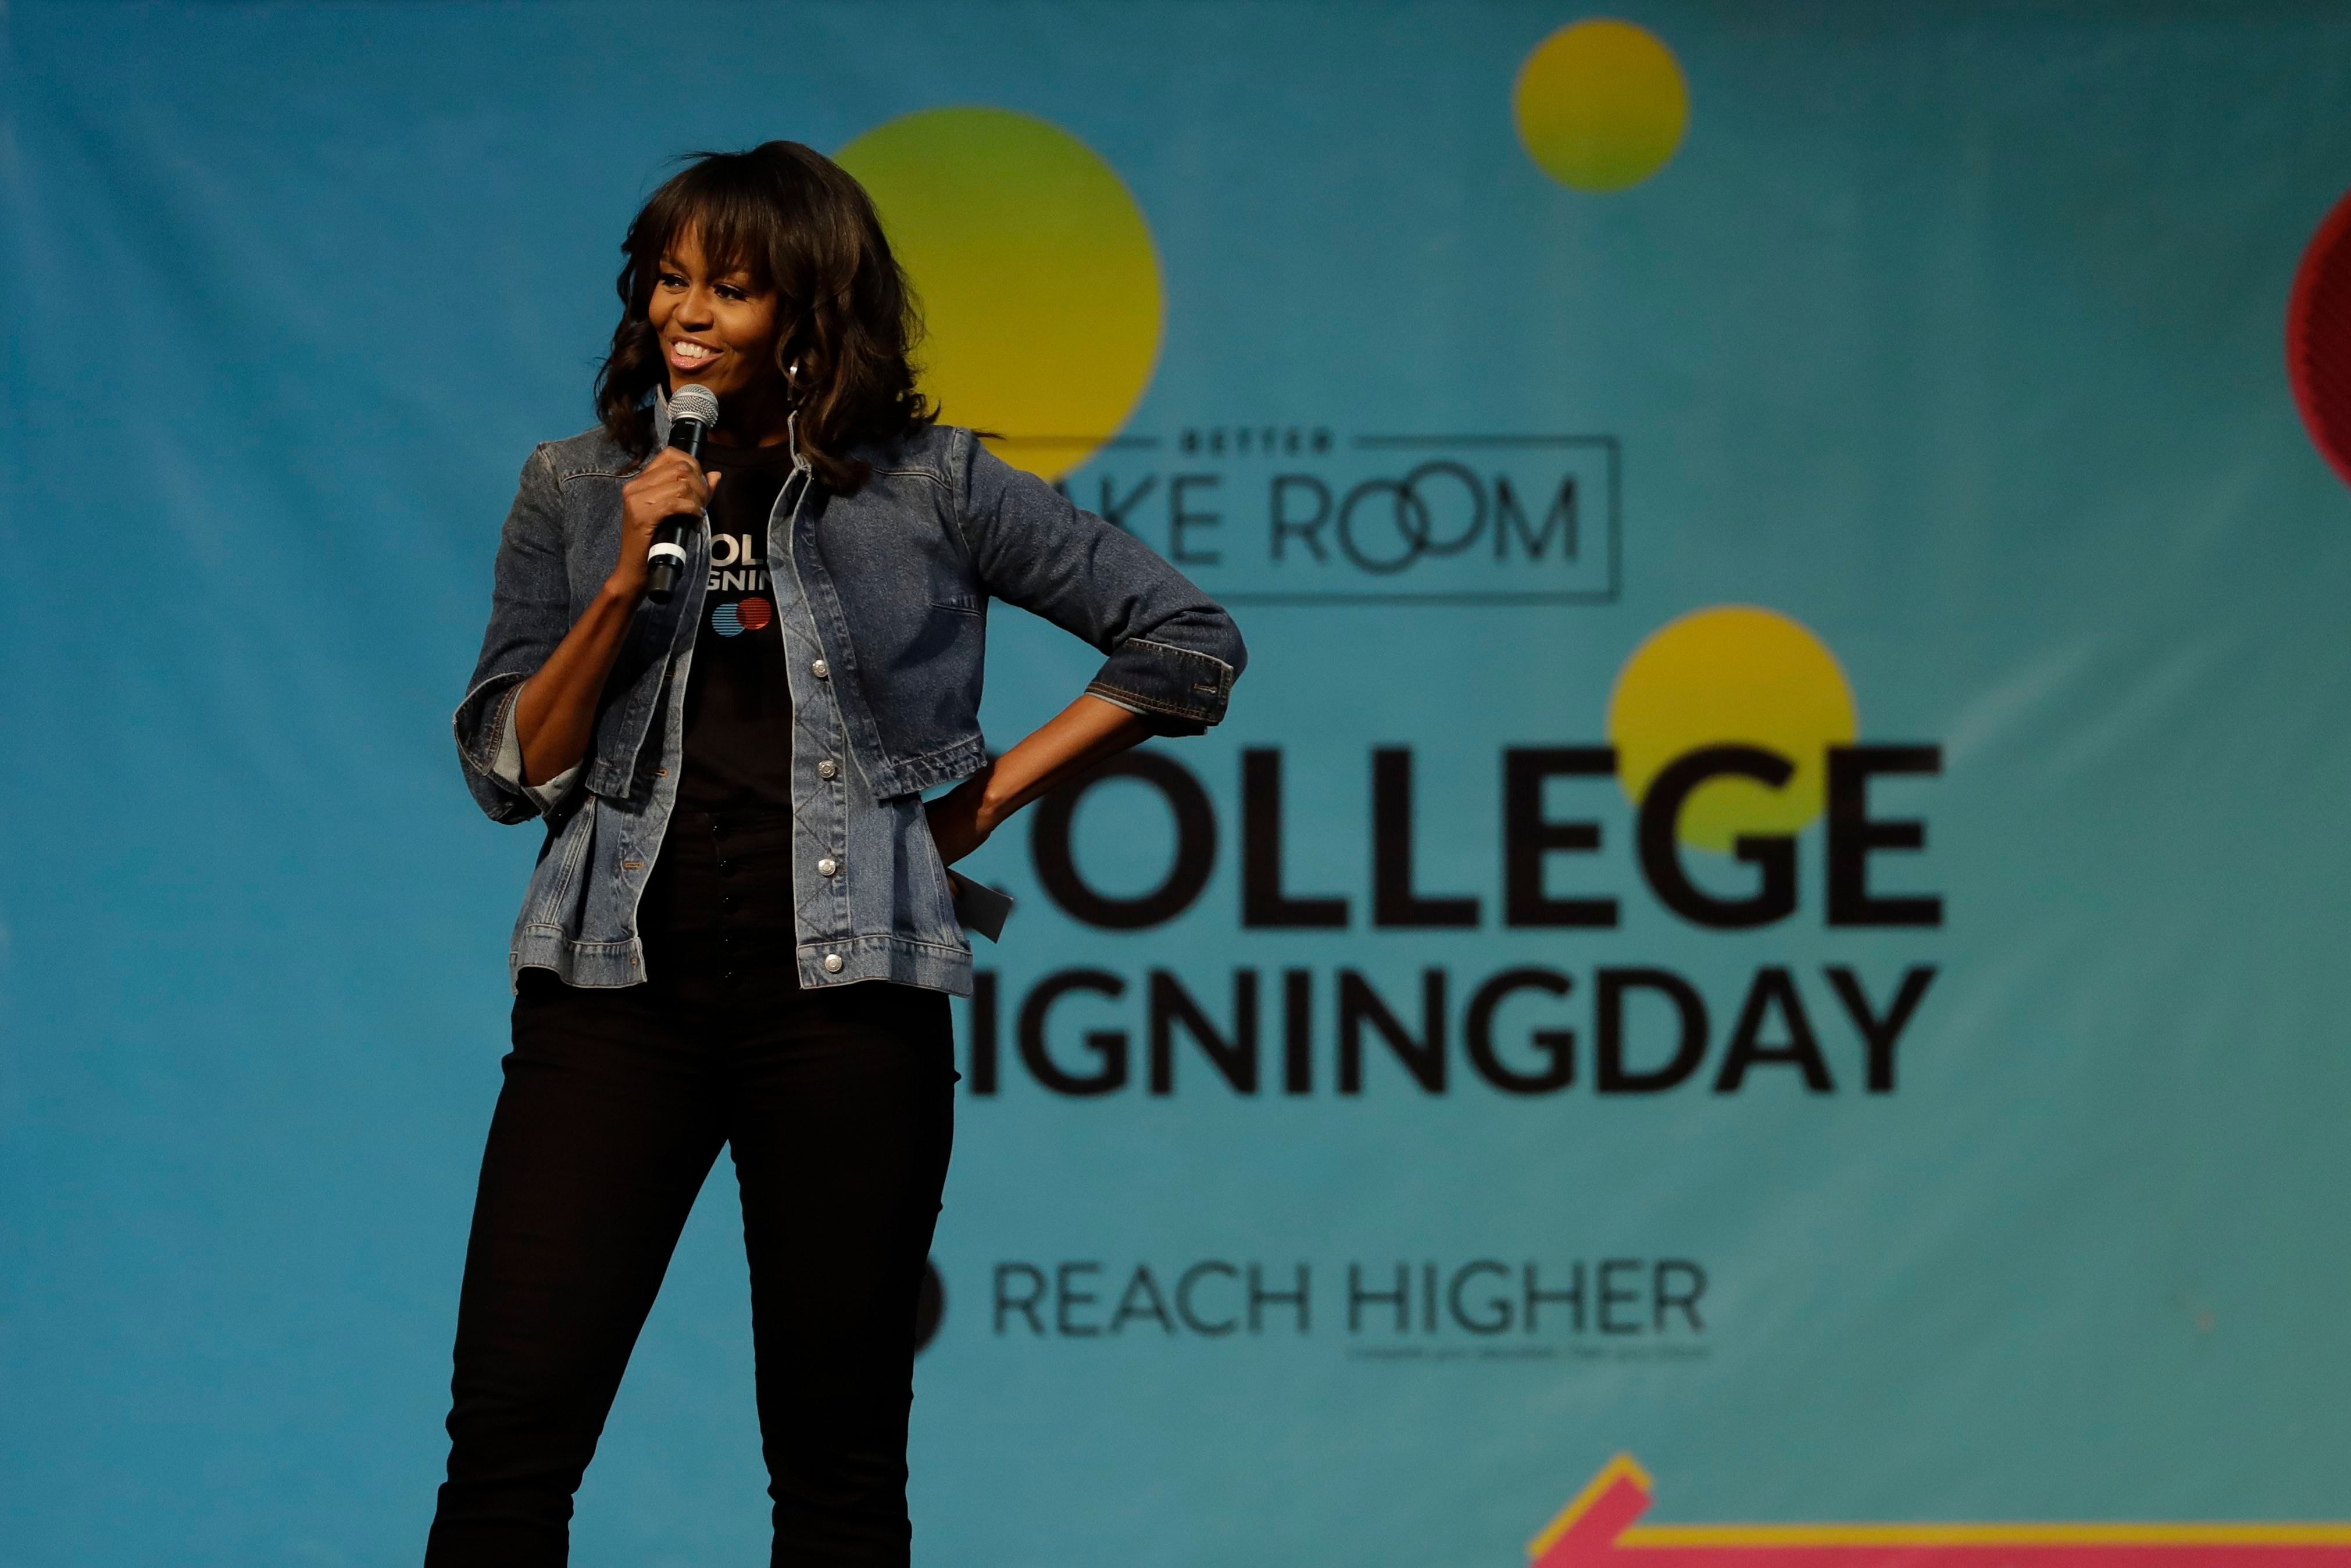 This Video Of Michelle Obama Dancing With Jussie Smollett At College Signing Day Is The Break You Need From The News